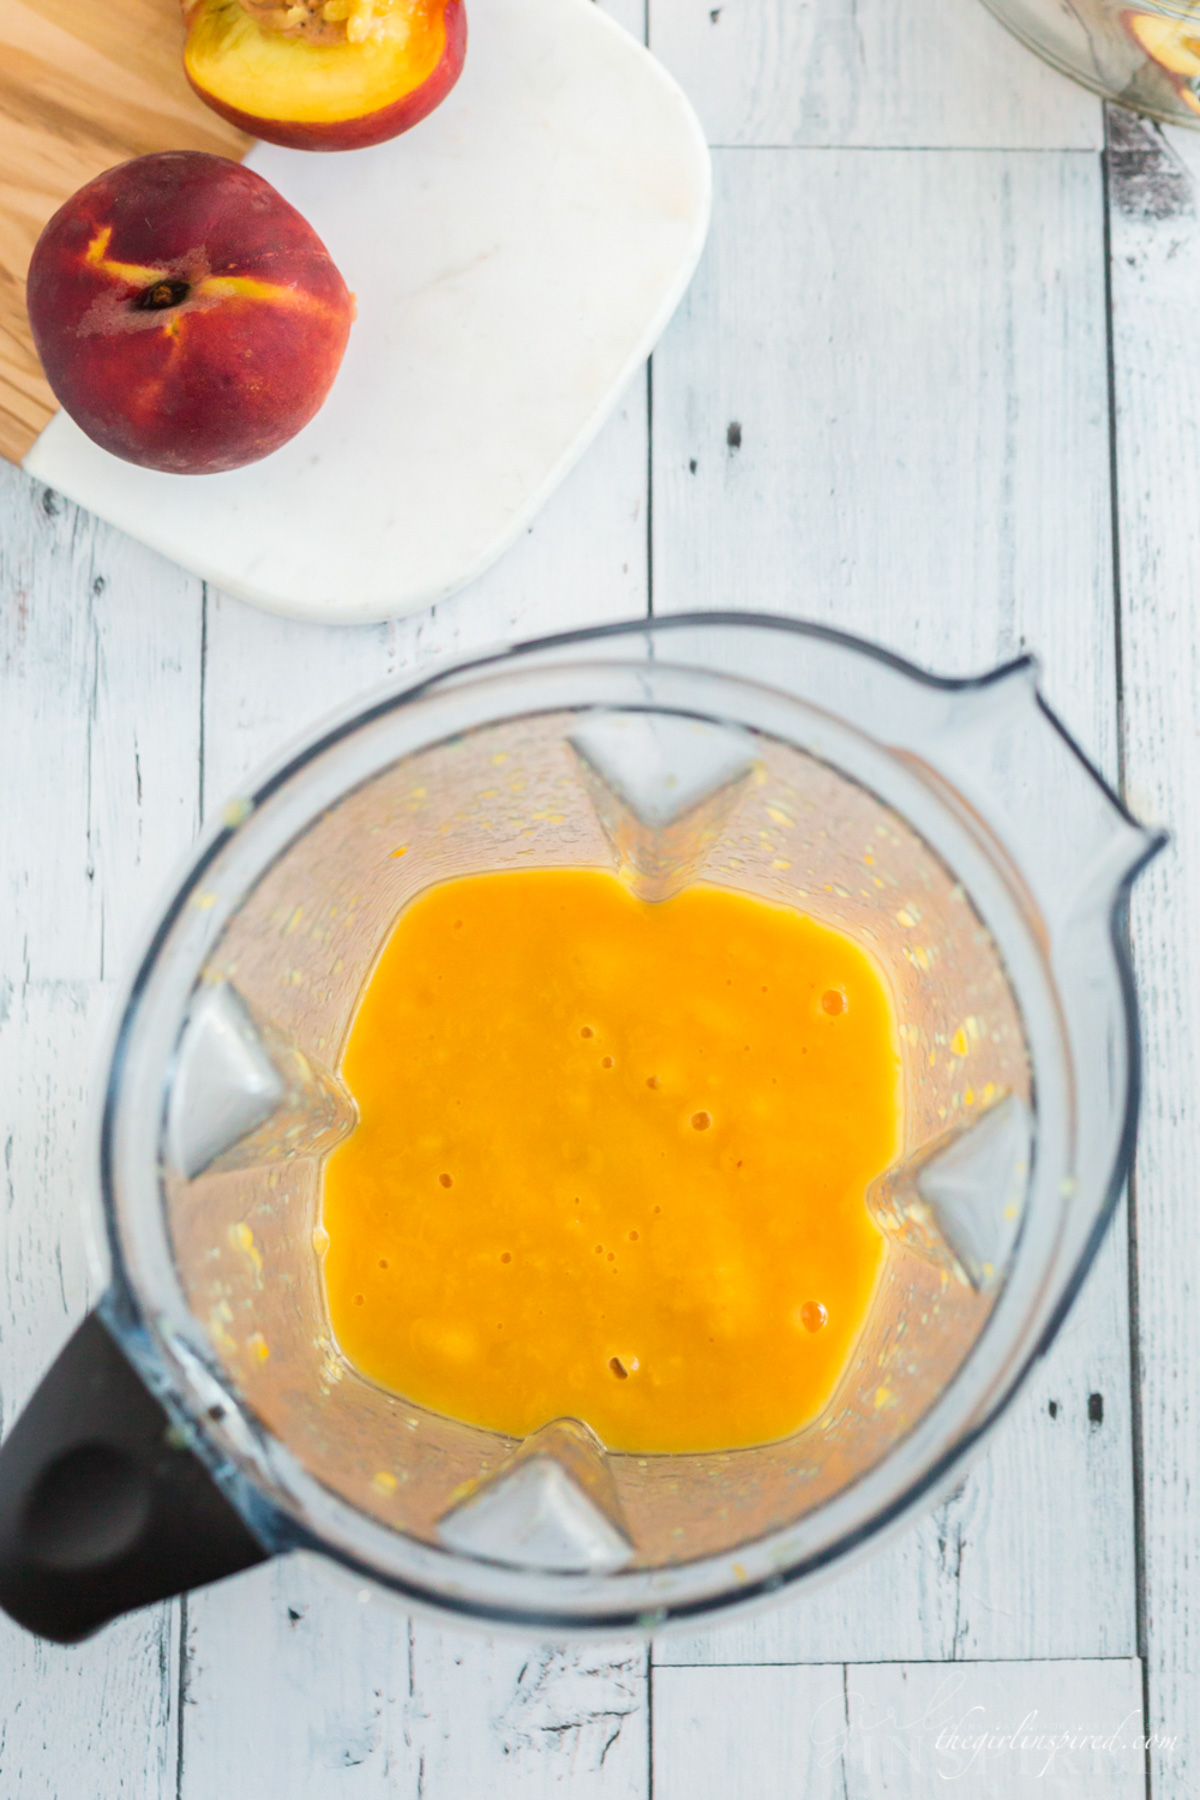 Blended peach and mango puree in the carafe of a blender.